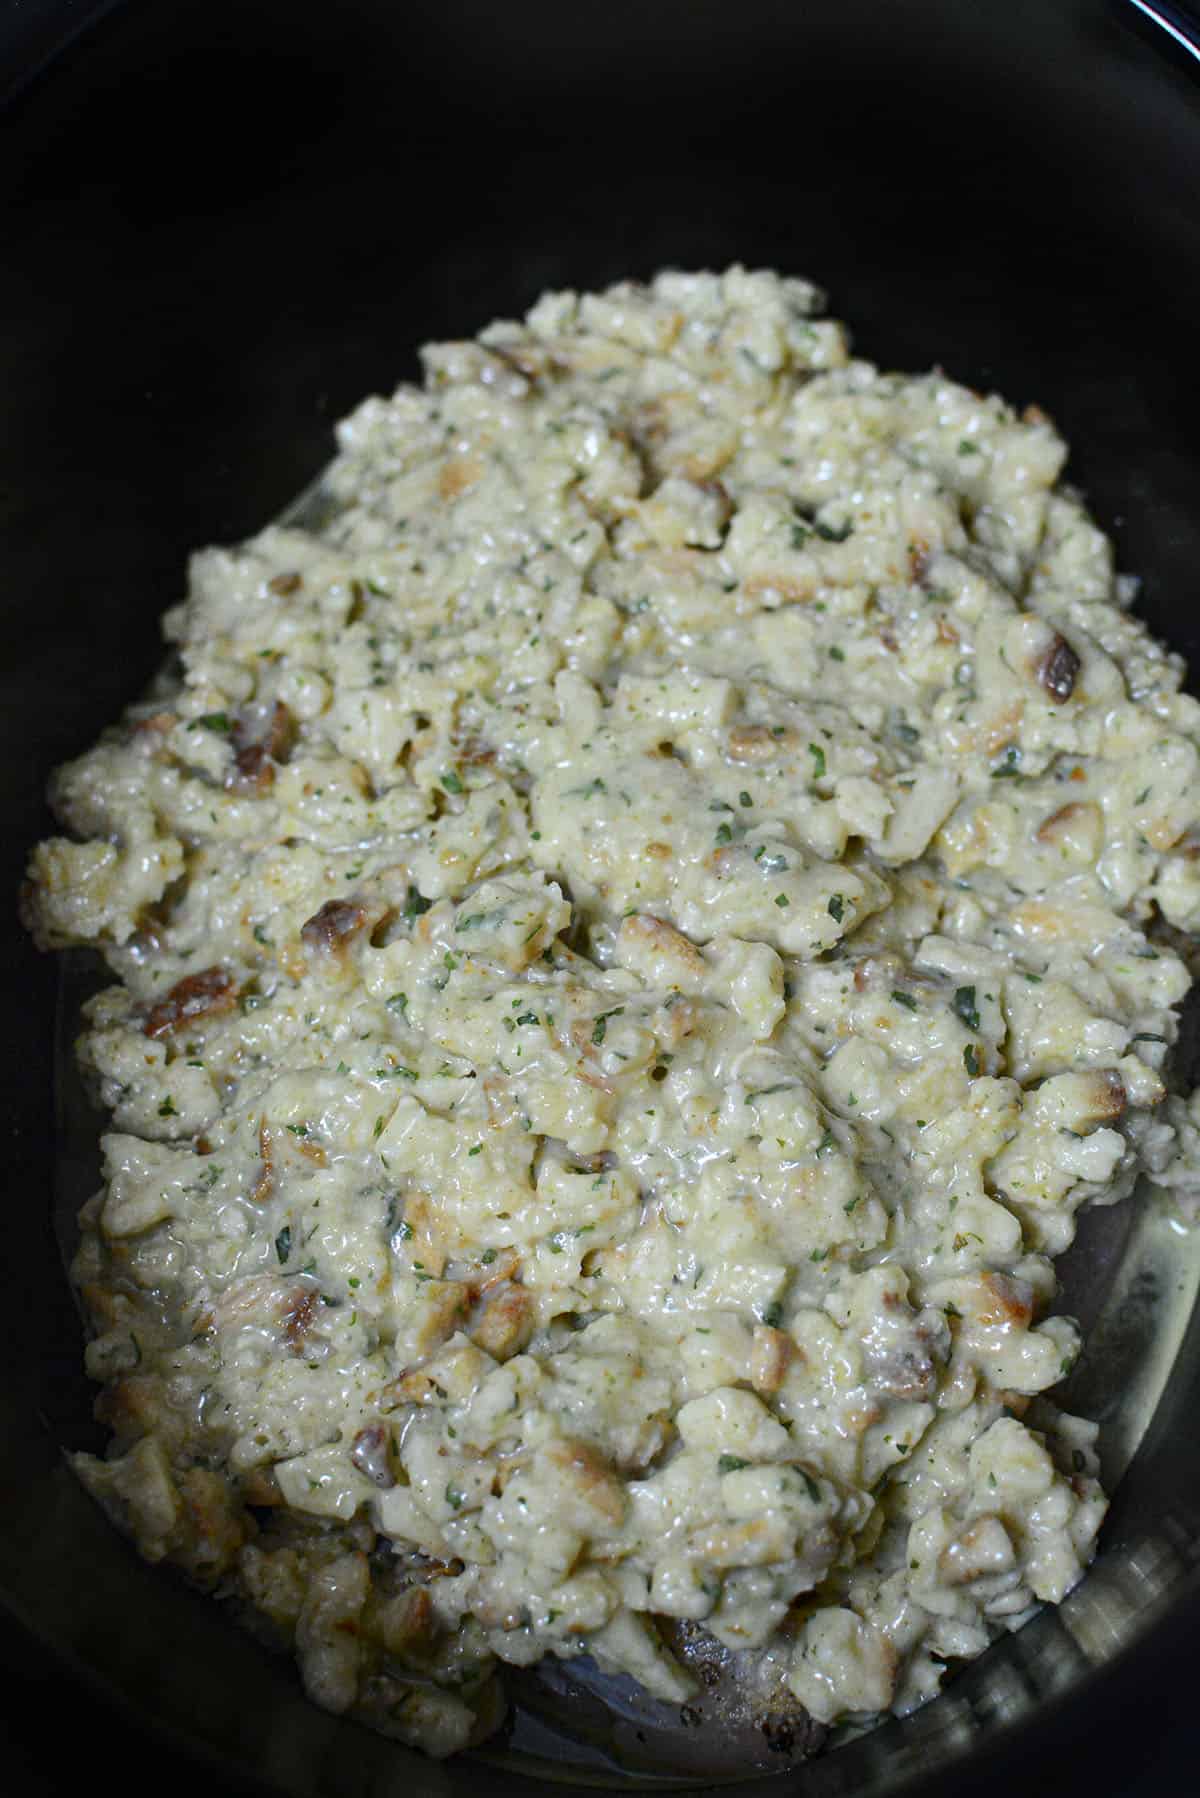 The stuffing mixture has been spread over top the chicken breasts in the slow cooker.